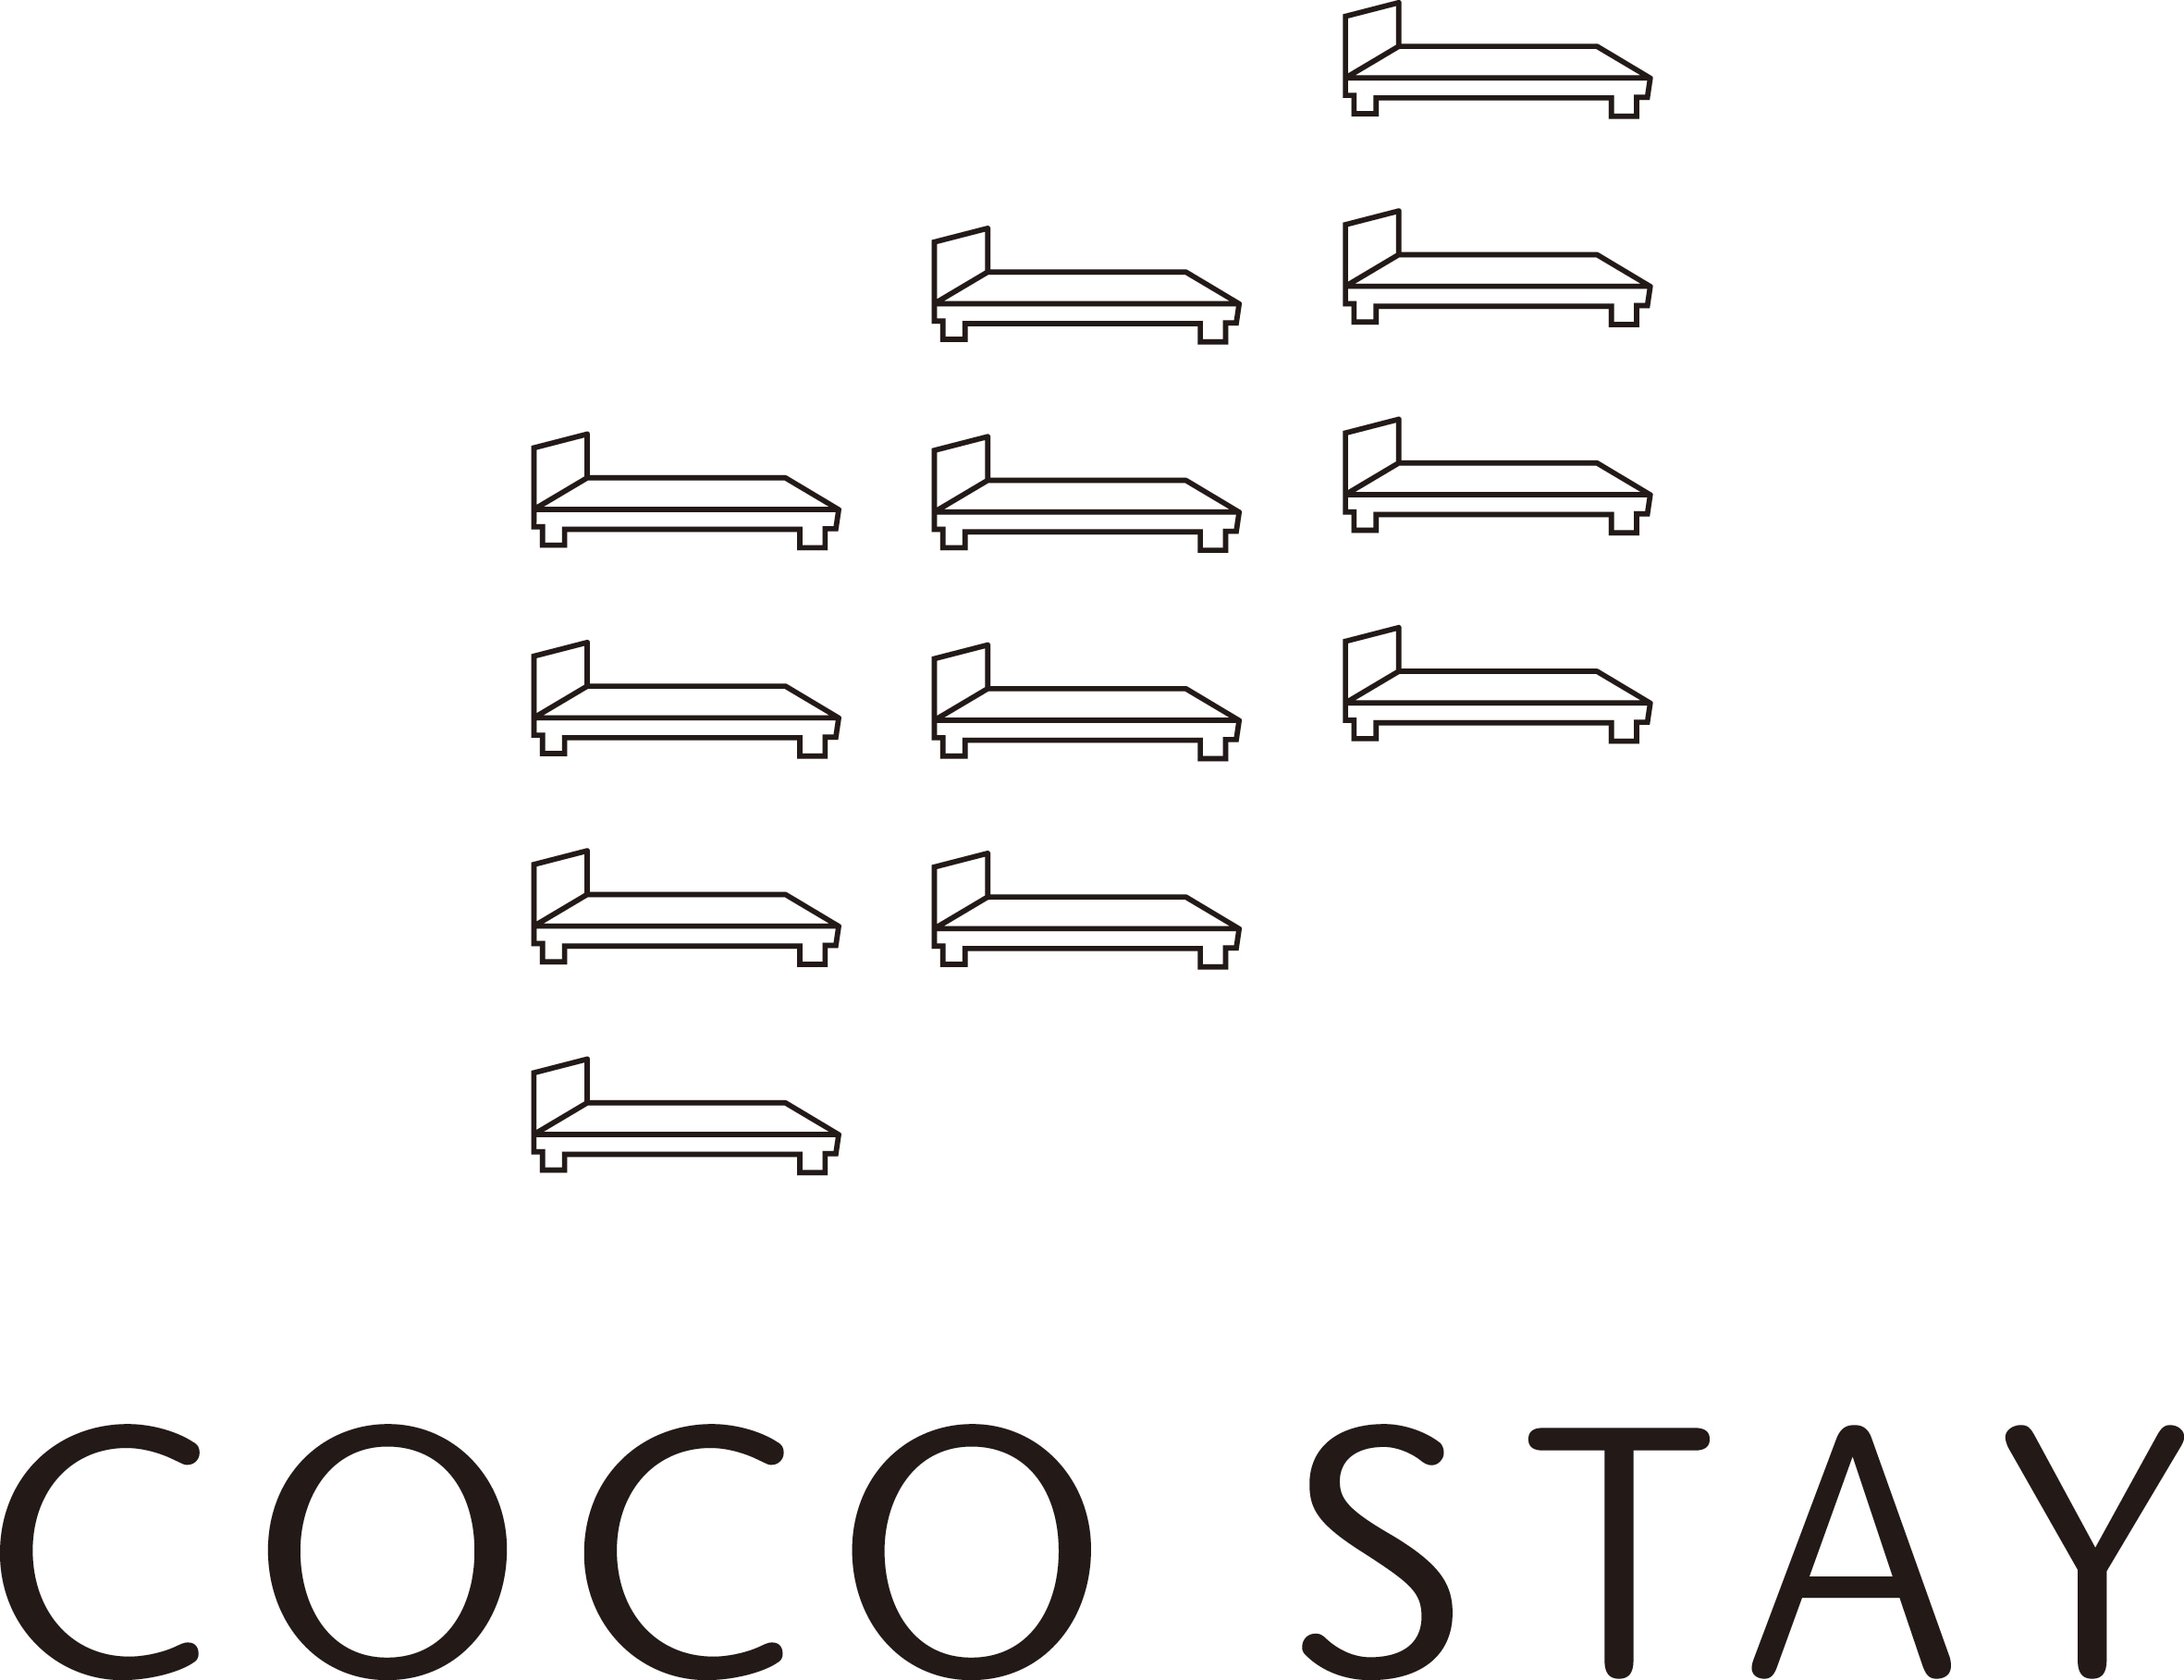 [COCO STAY] 標準方案